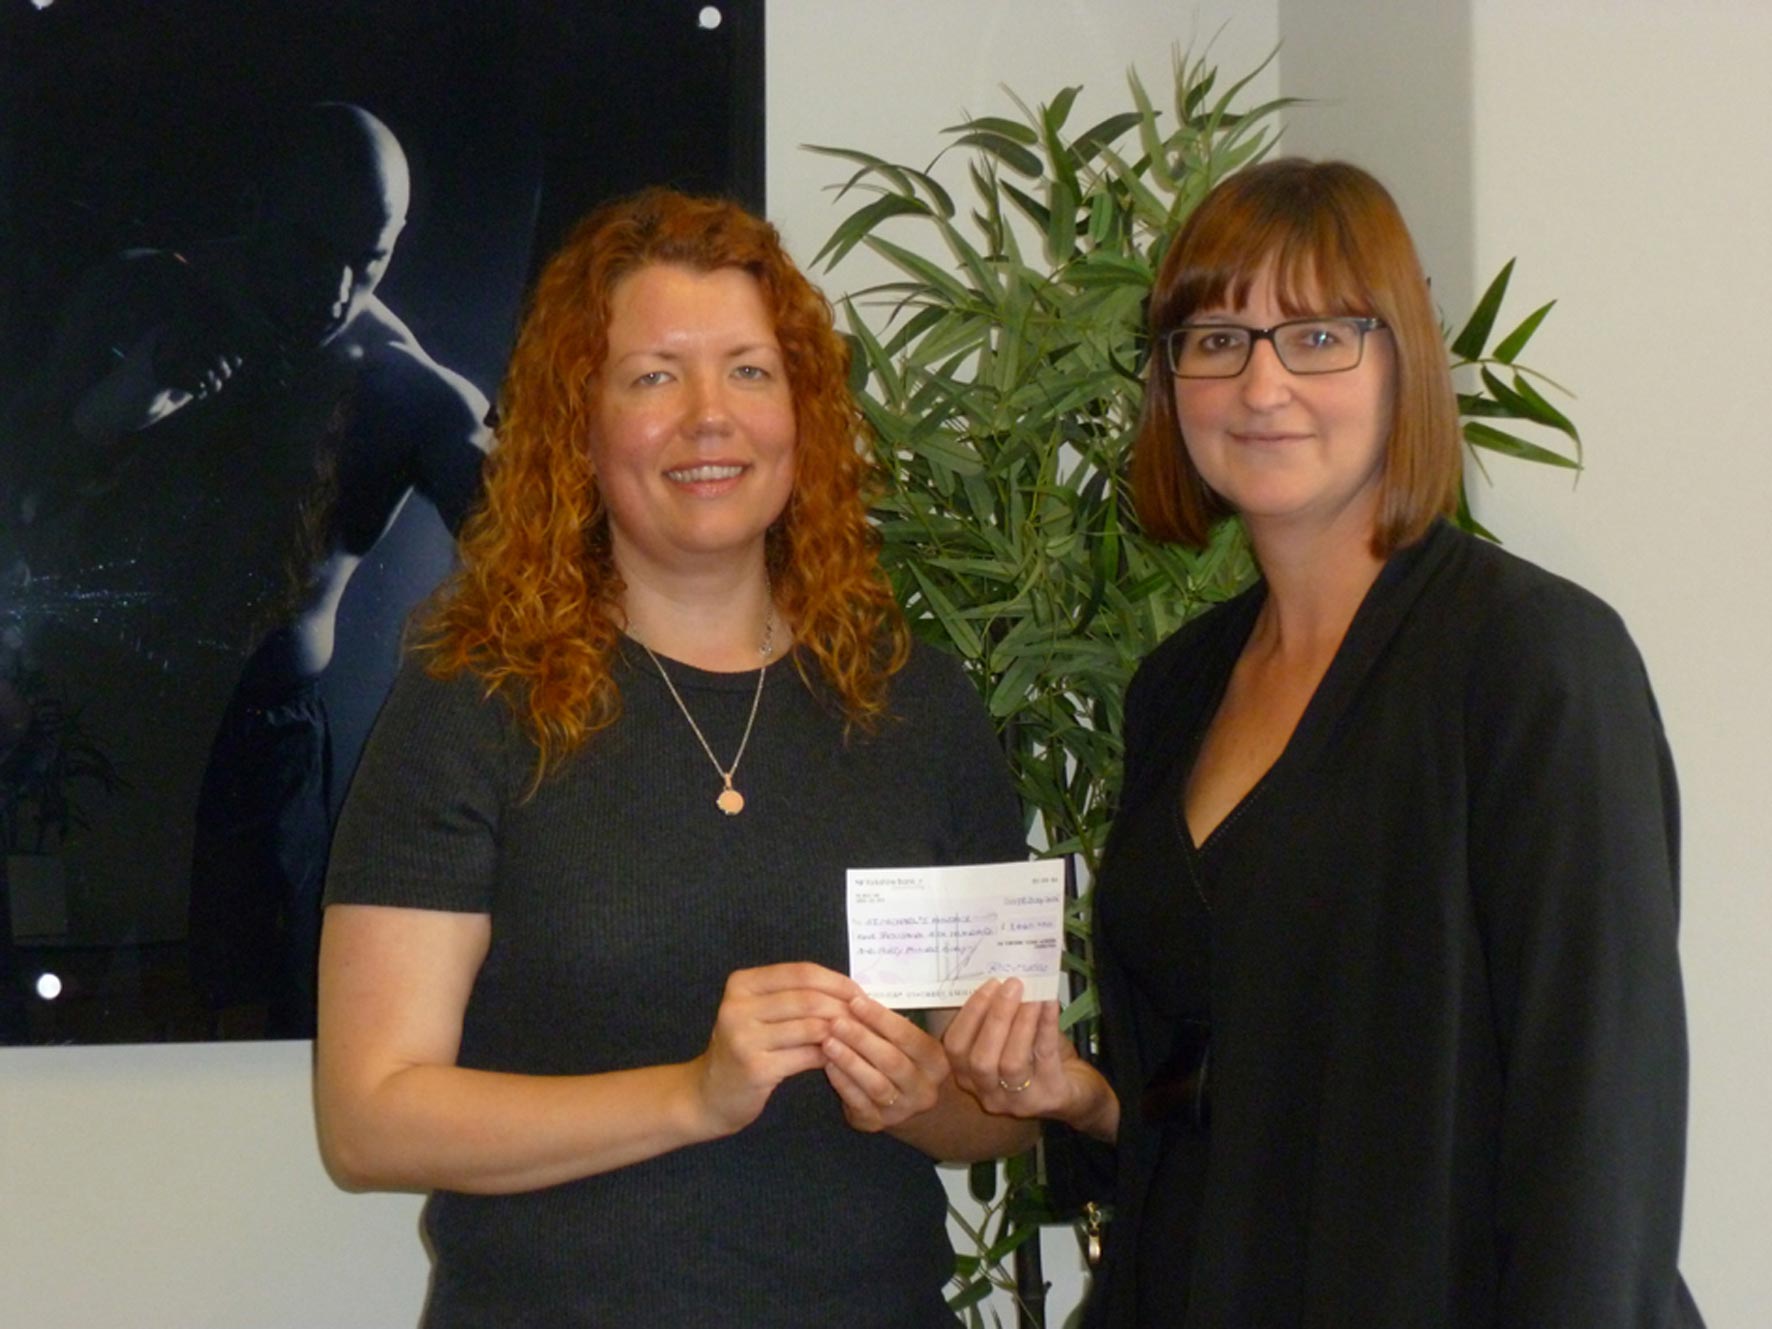 Megan Itson receives the cheque from Sonia Jones